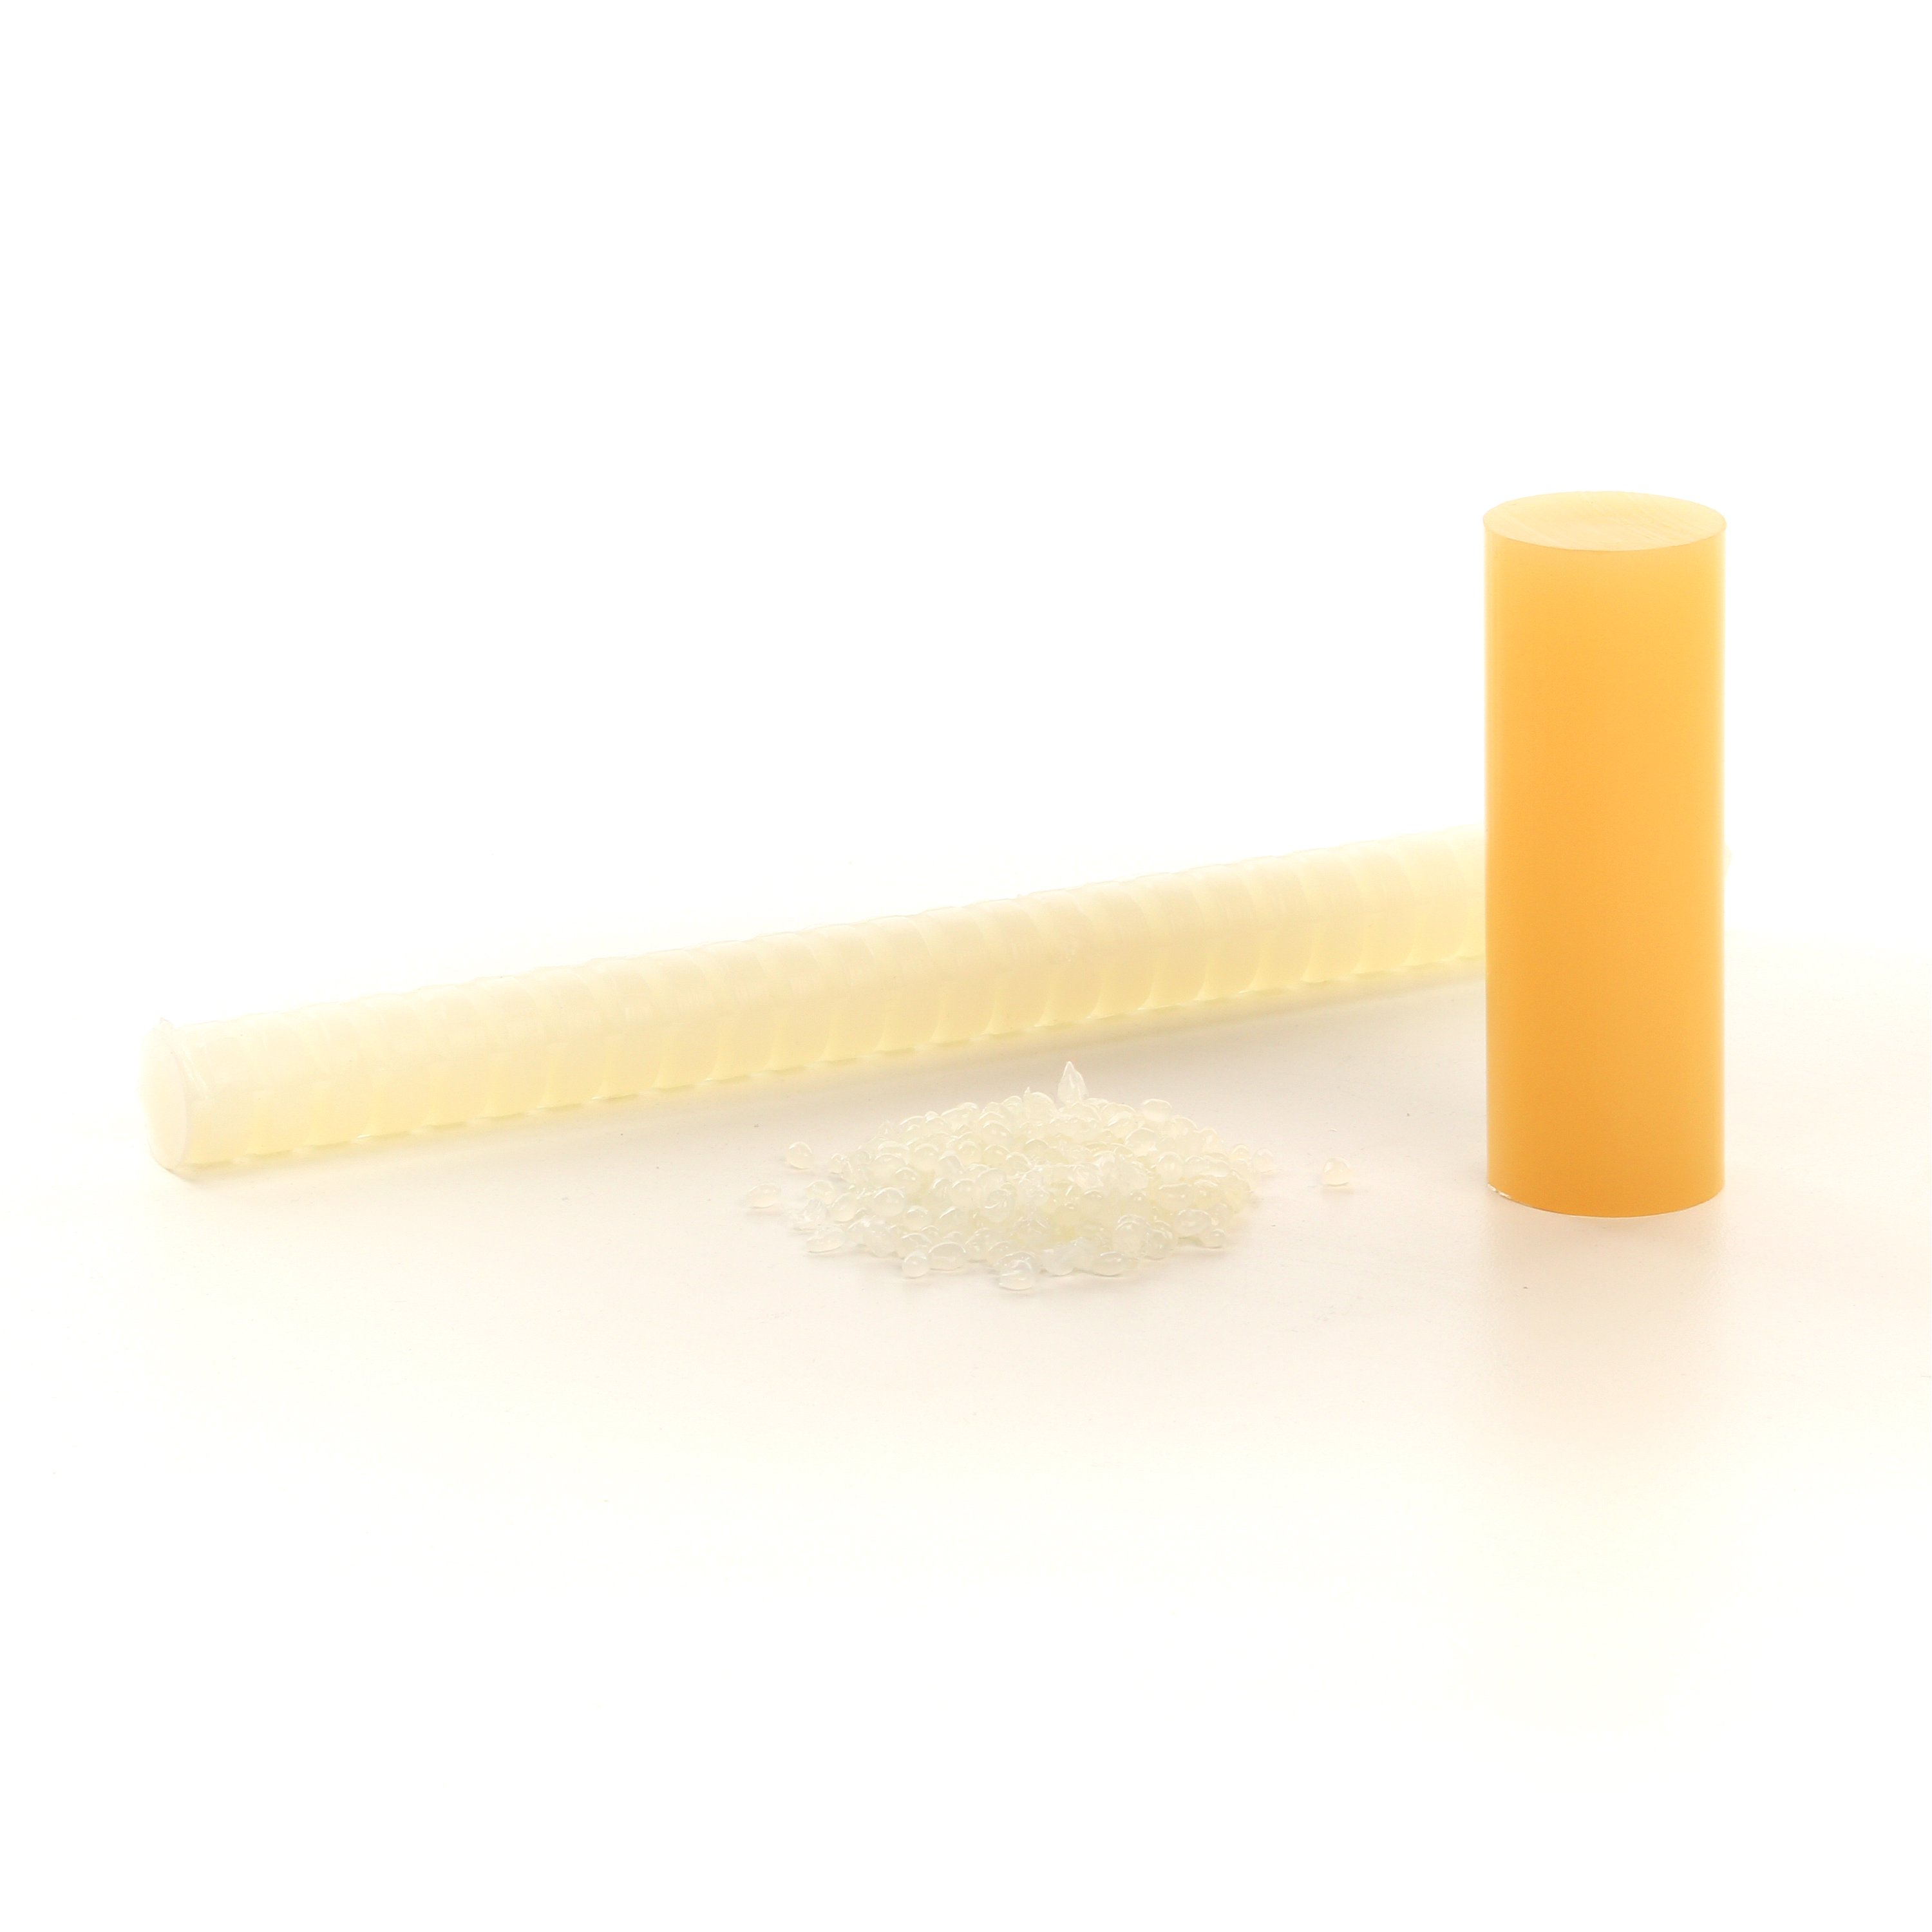 3M™ Hot Melt Adhesive 3762 is 100% solids, thermoplastic resin formulated to grab and seal quickly to meet the demands of high-volume production settings such as packing, woodworking and assembly.